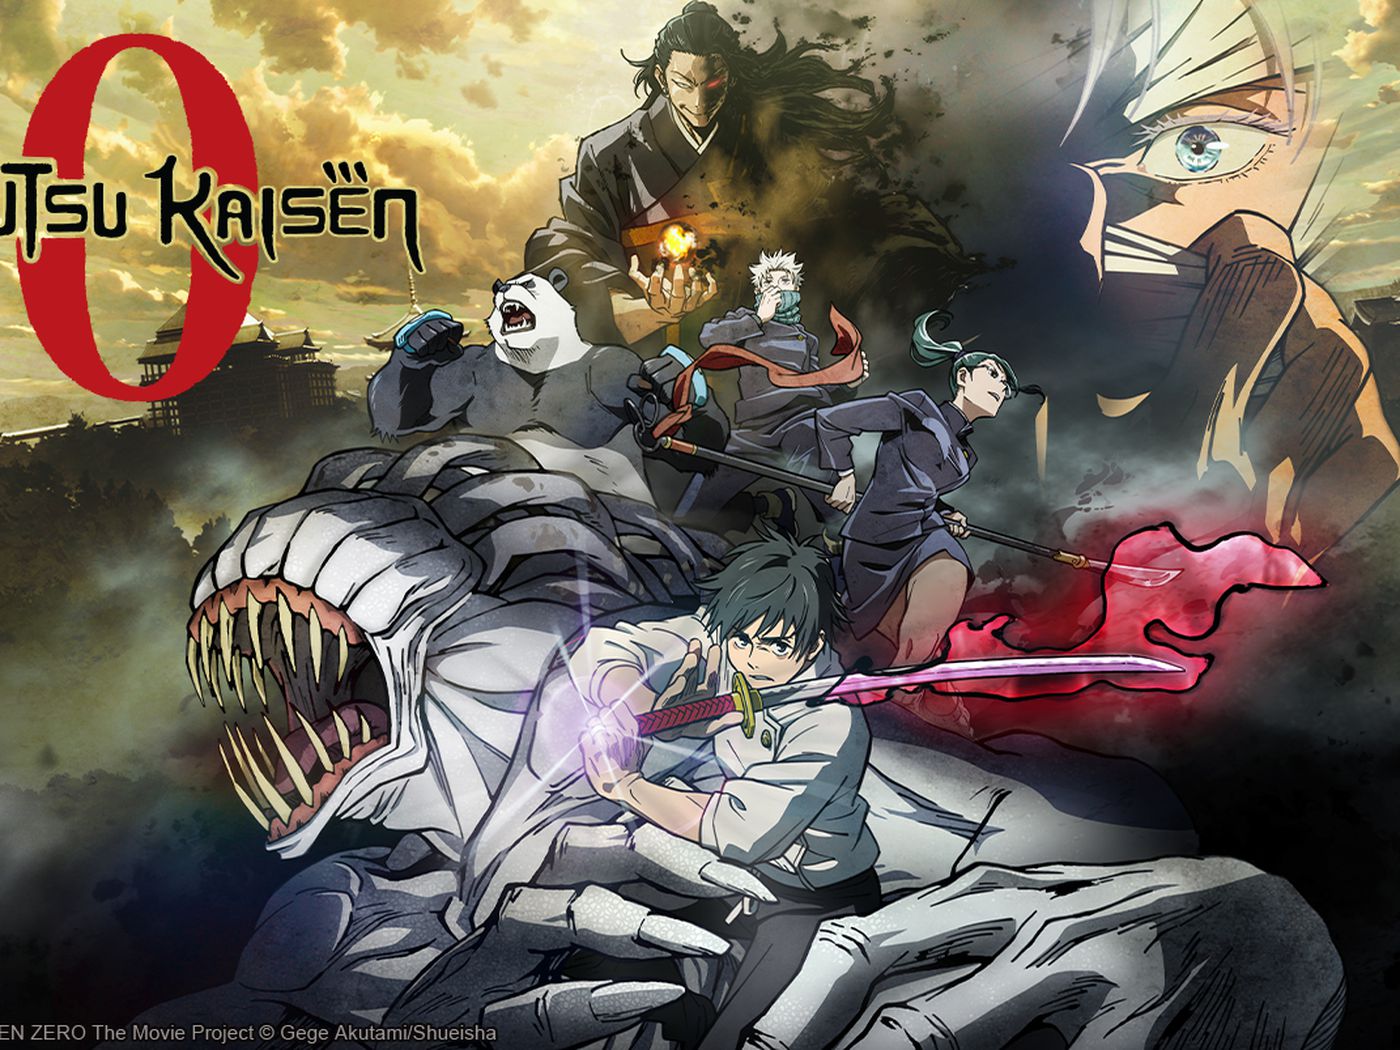 Jujutsu Kaisen 0 American release date announced for March